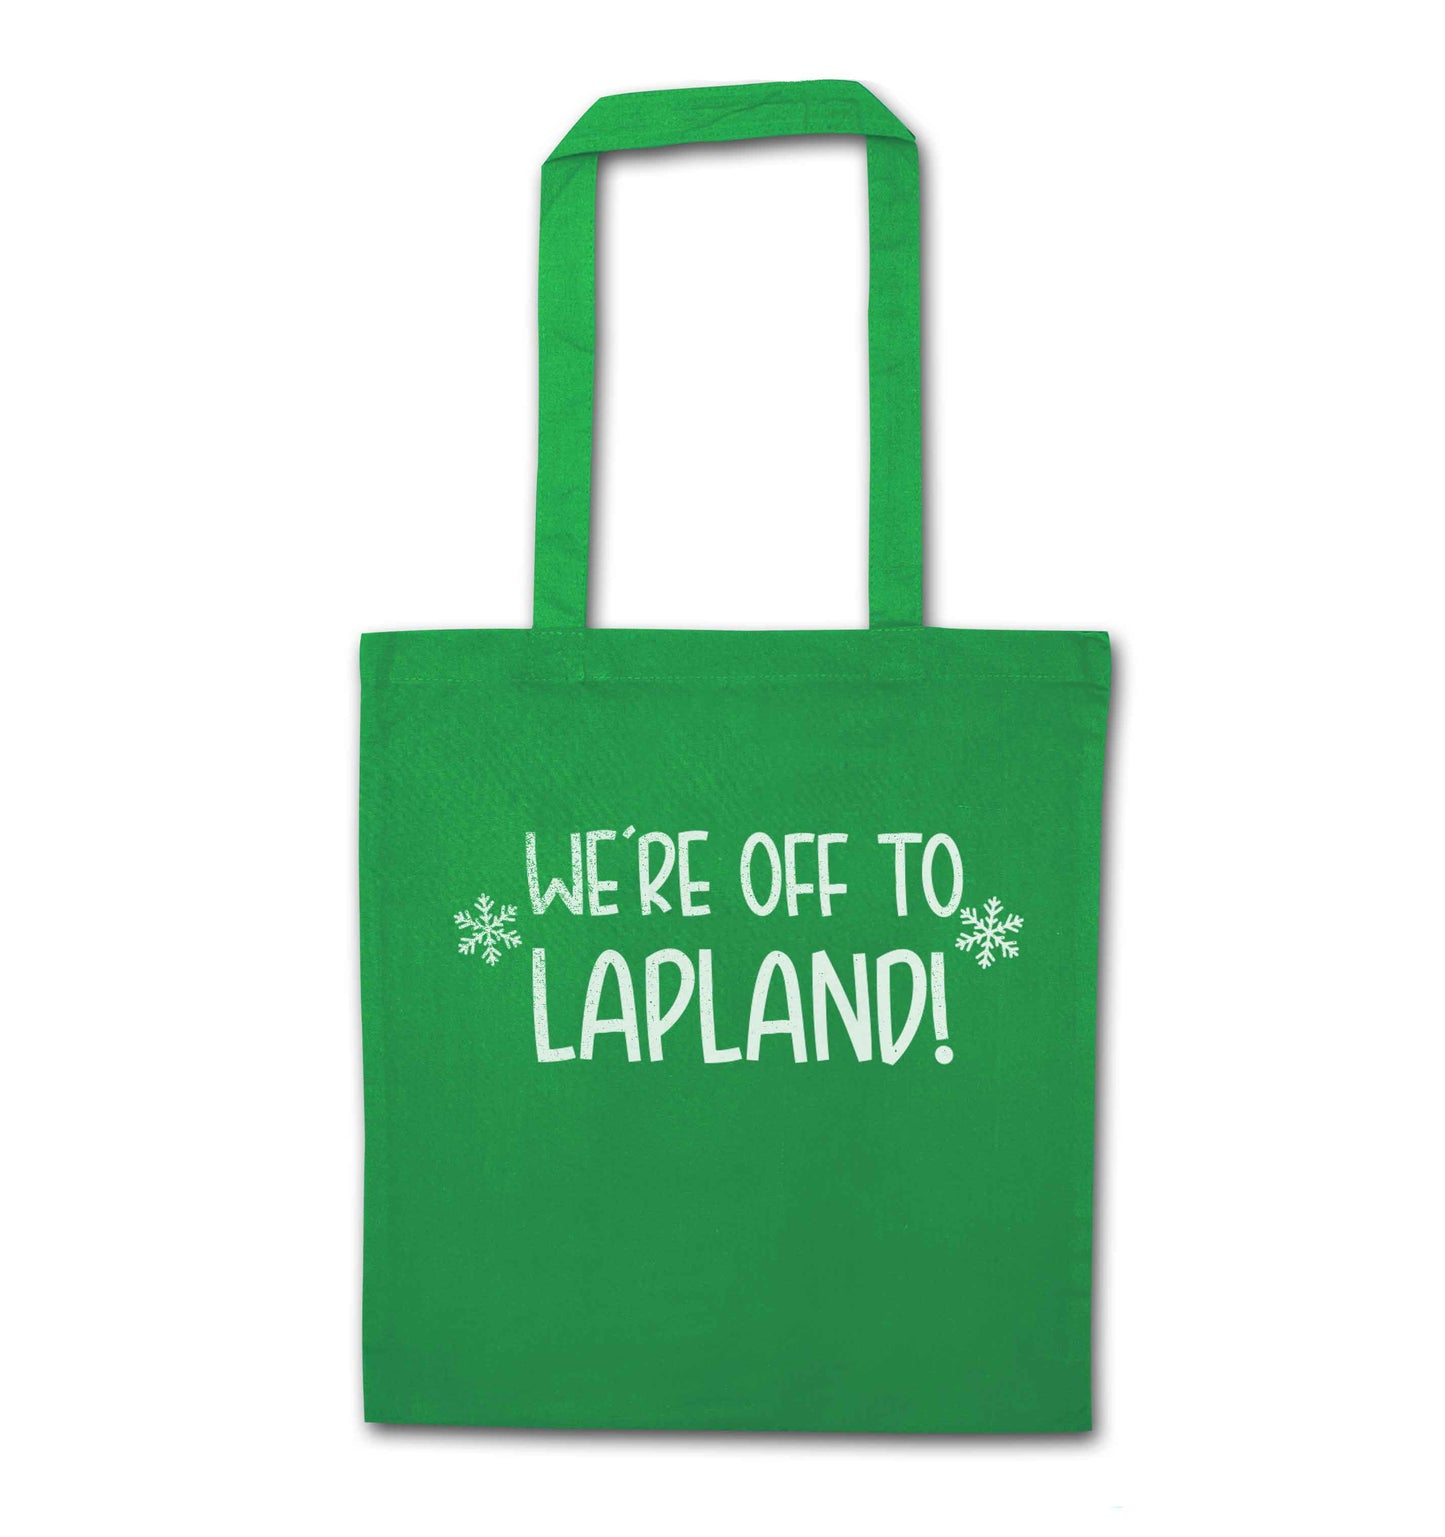 We're off to Lapland green tote bag